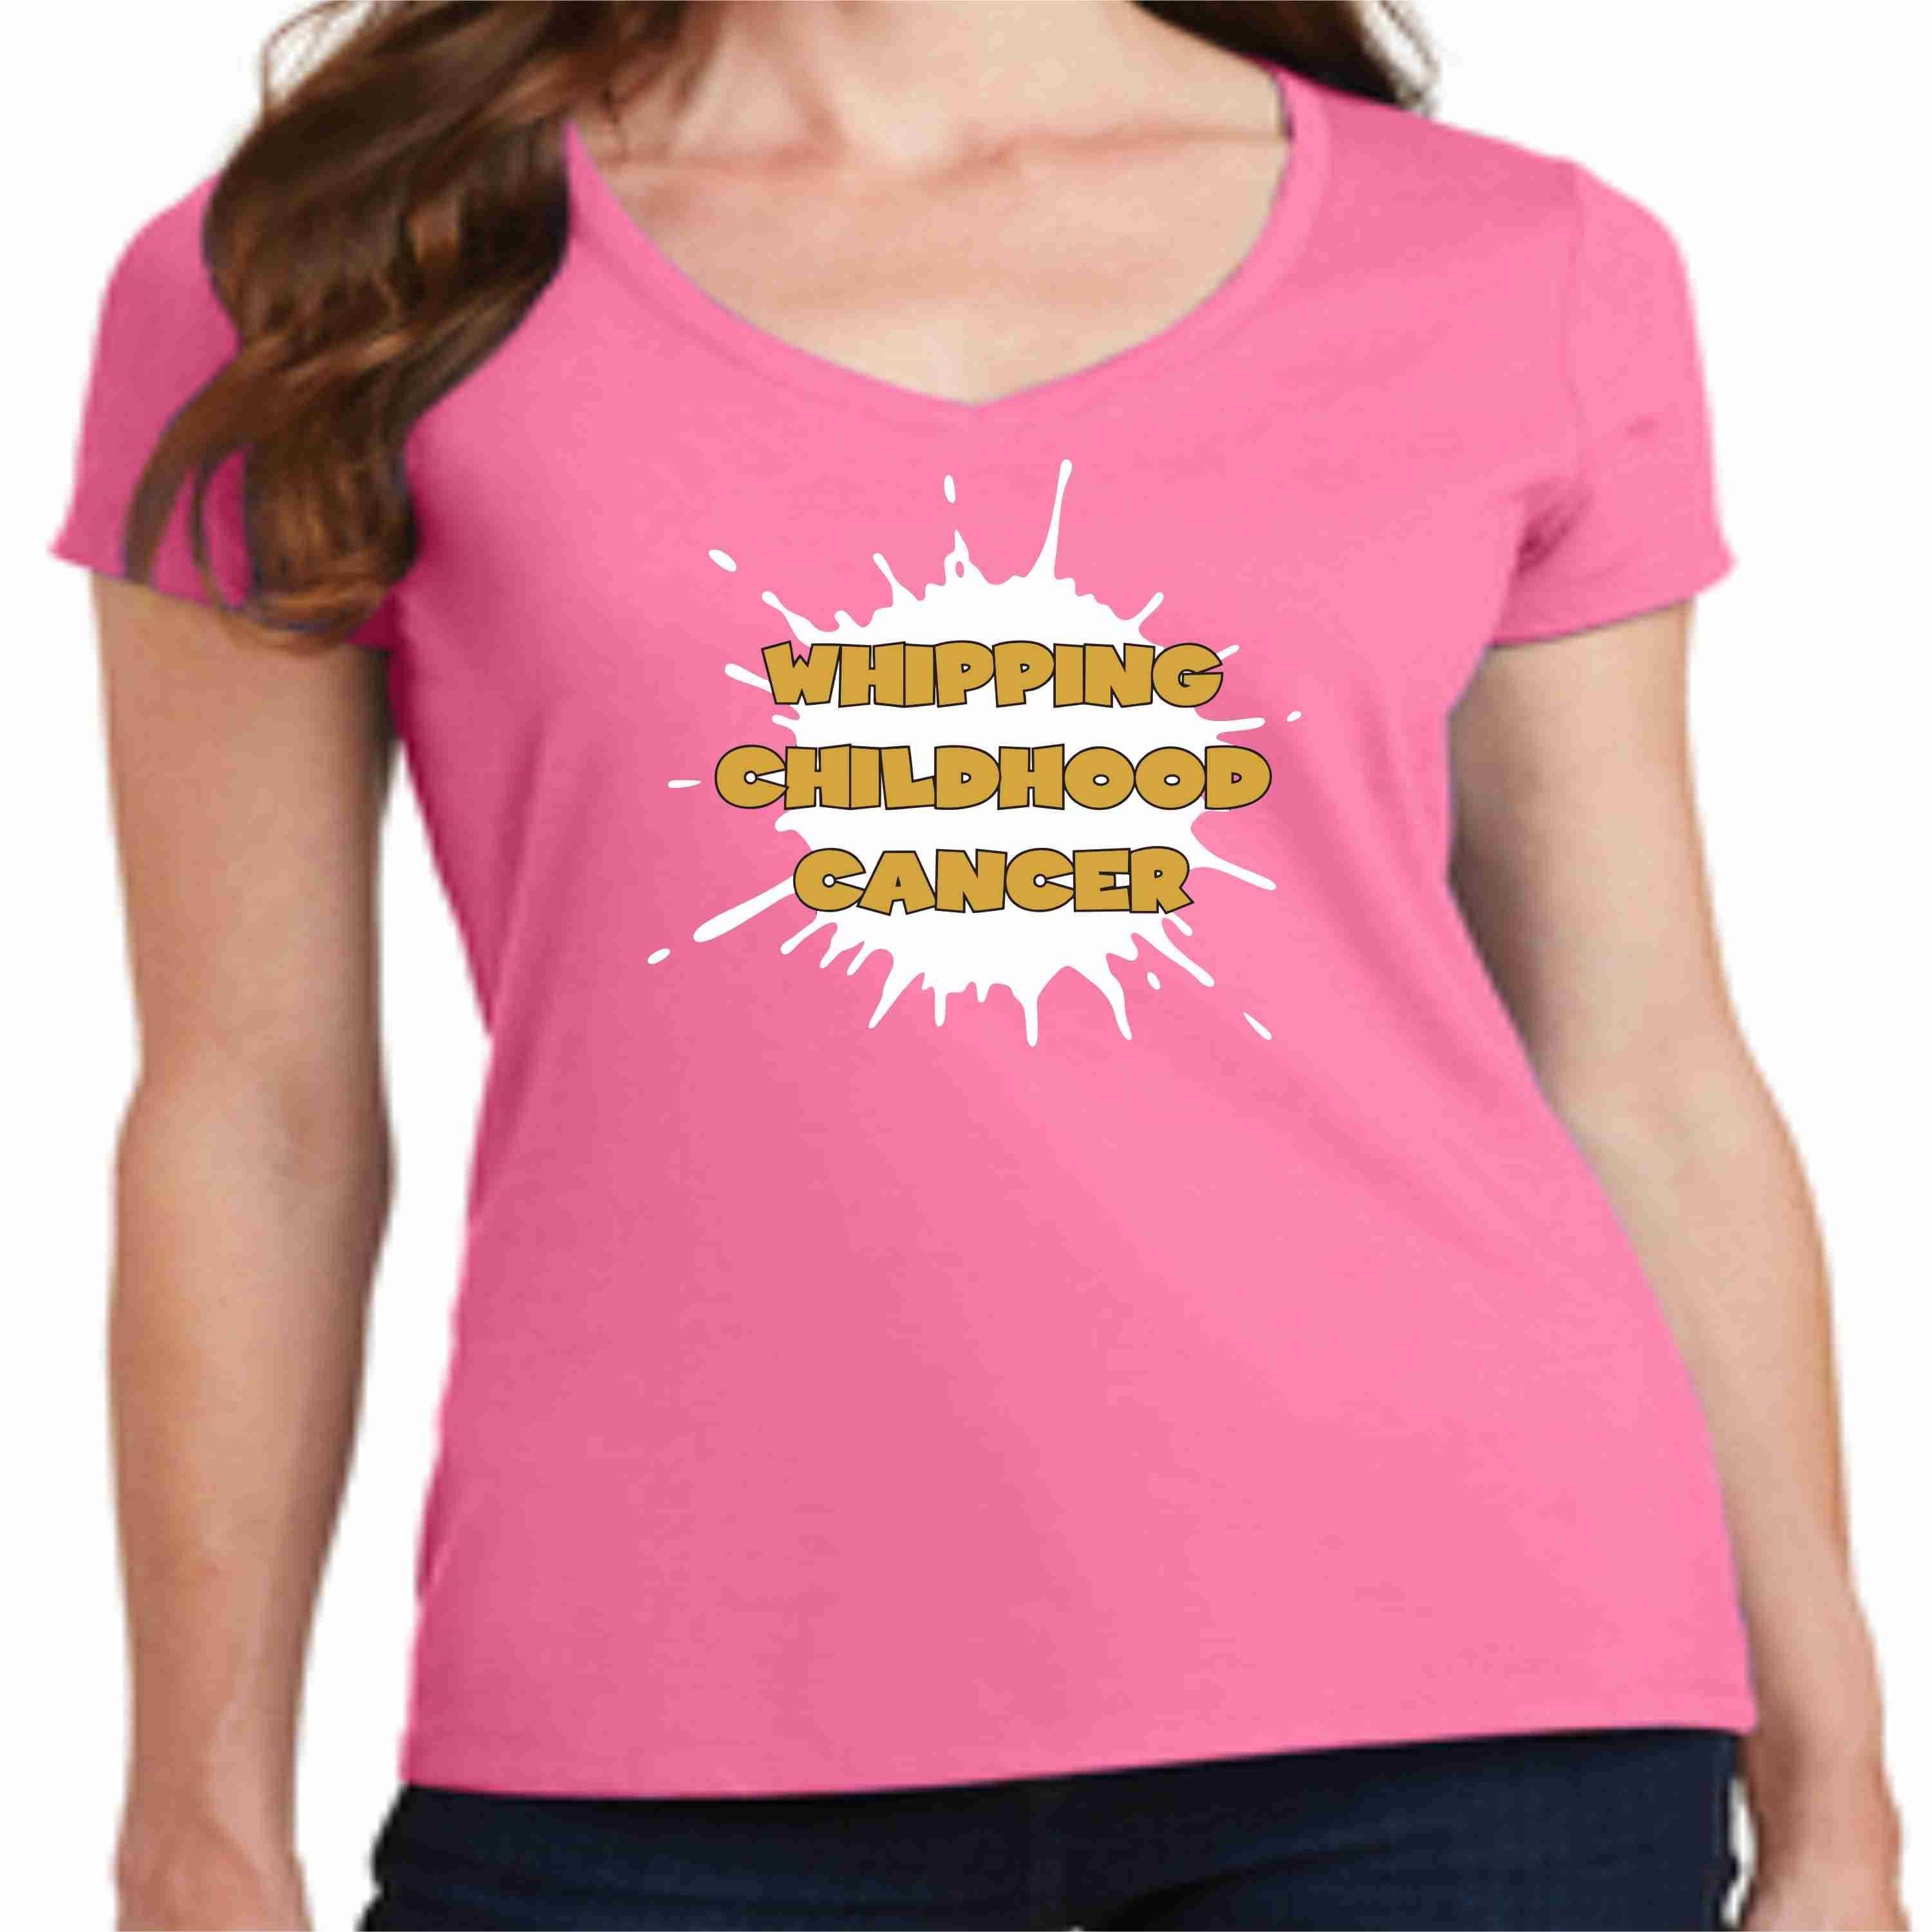 Gold is the New Pink -Whipping Childhood Cancer Short Sleeve Screen Printed T-Shirt Womens VIEW ALL DESIGNS Becky's Boutique 